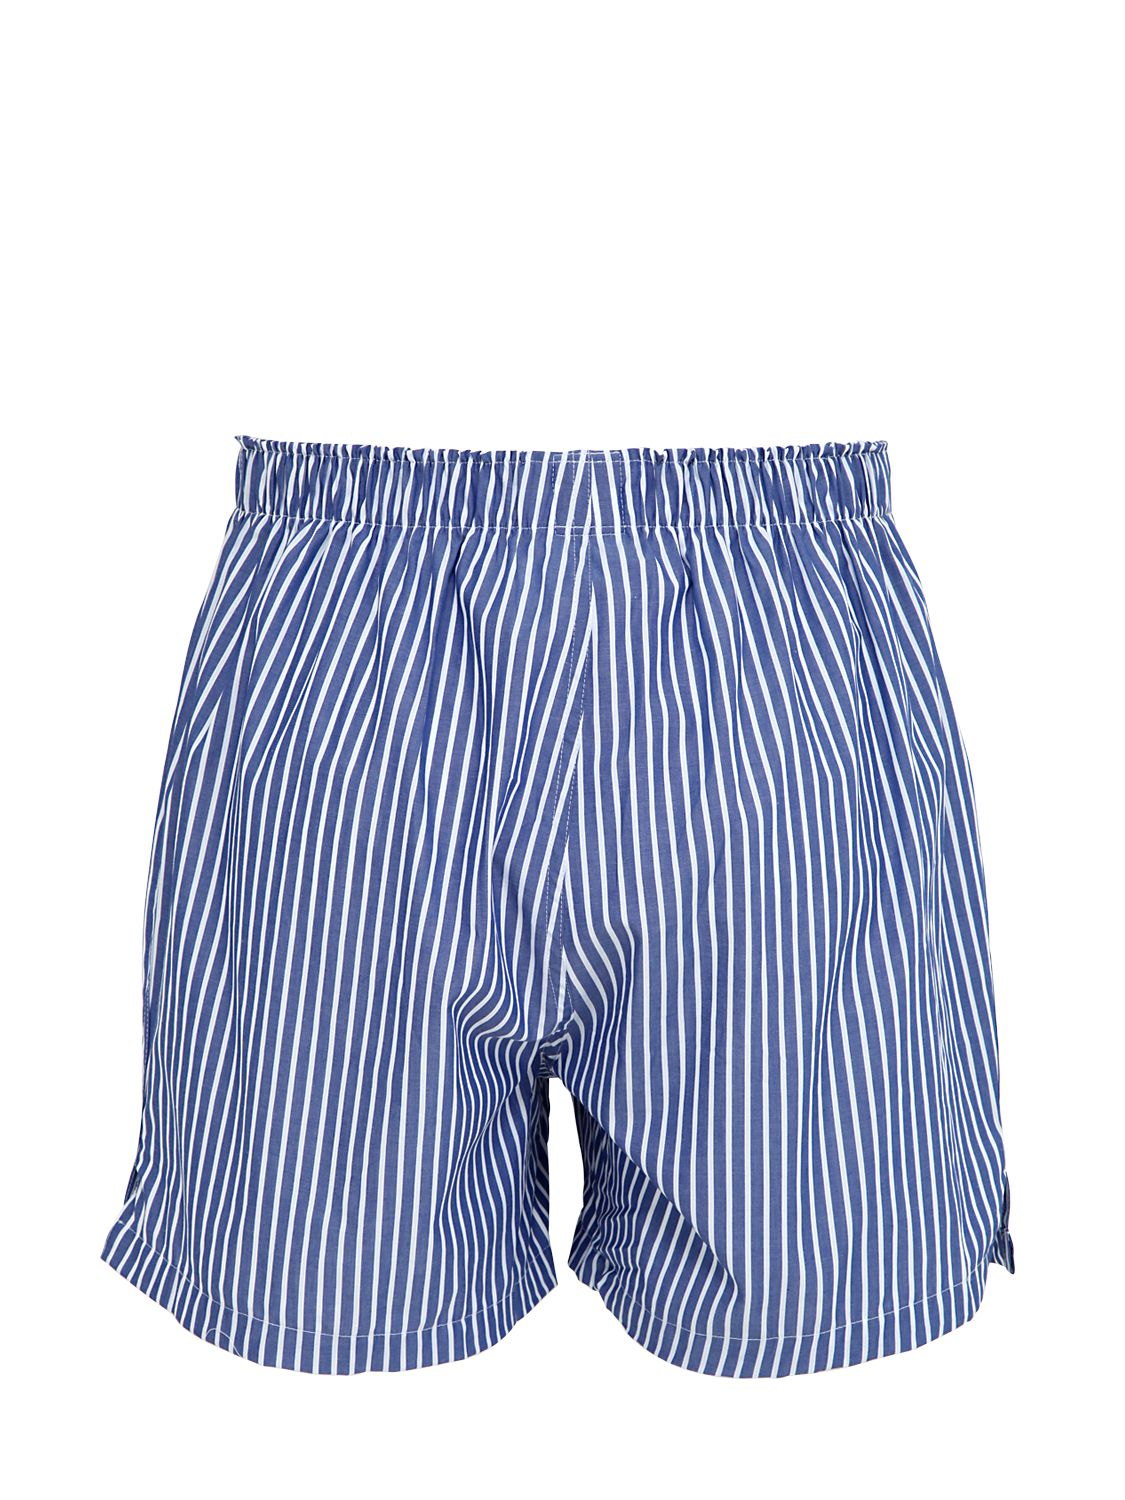 Brooks Brothers Cotton Boxers in Blue/White (Blue) for Men - Lyst